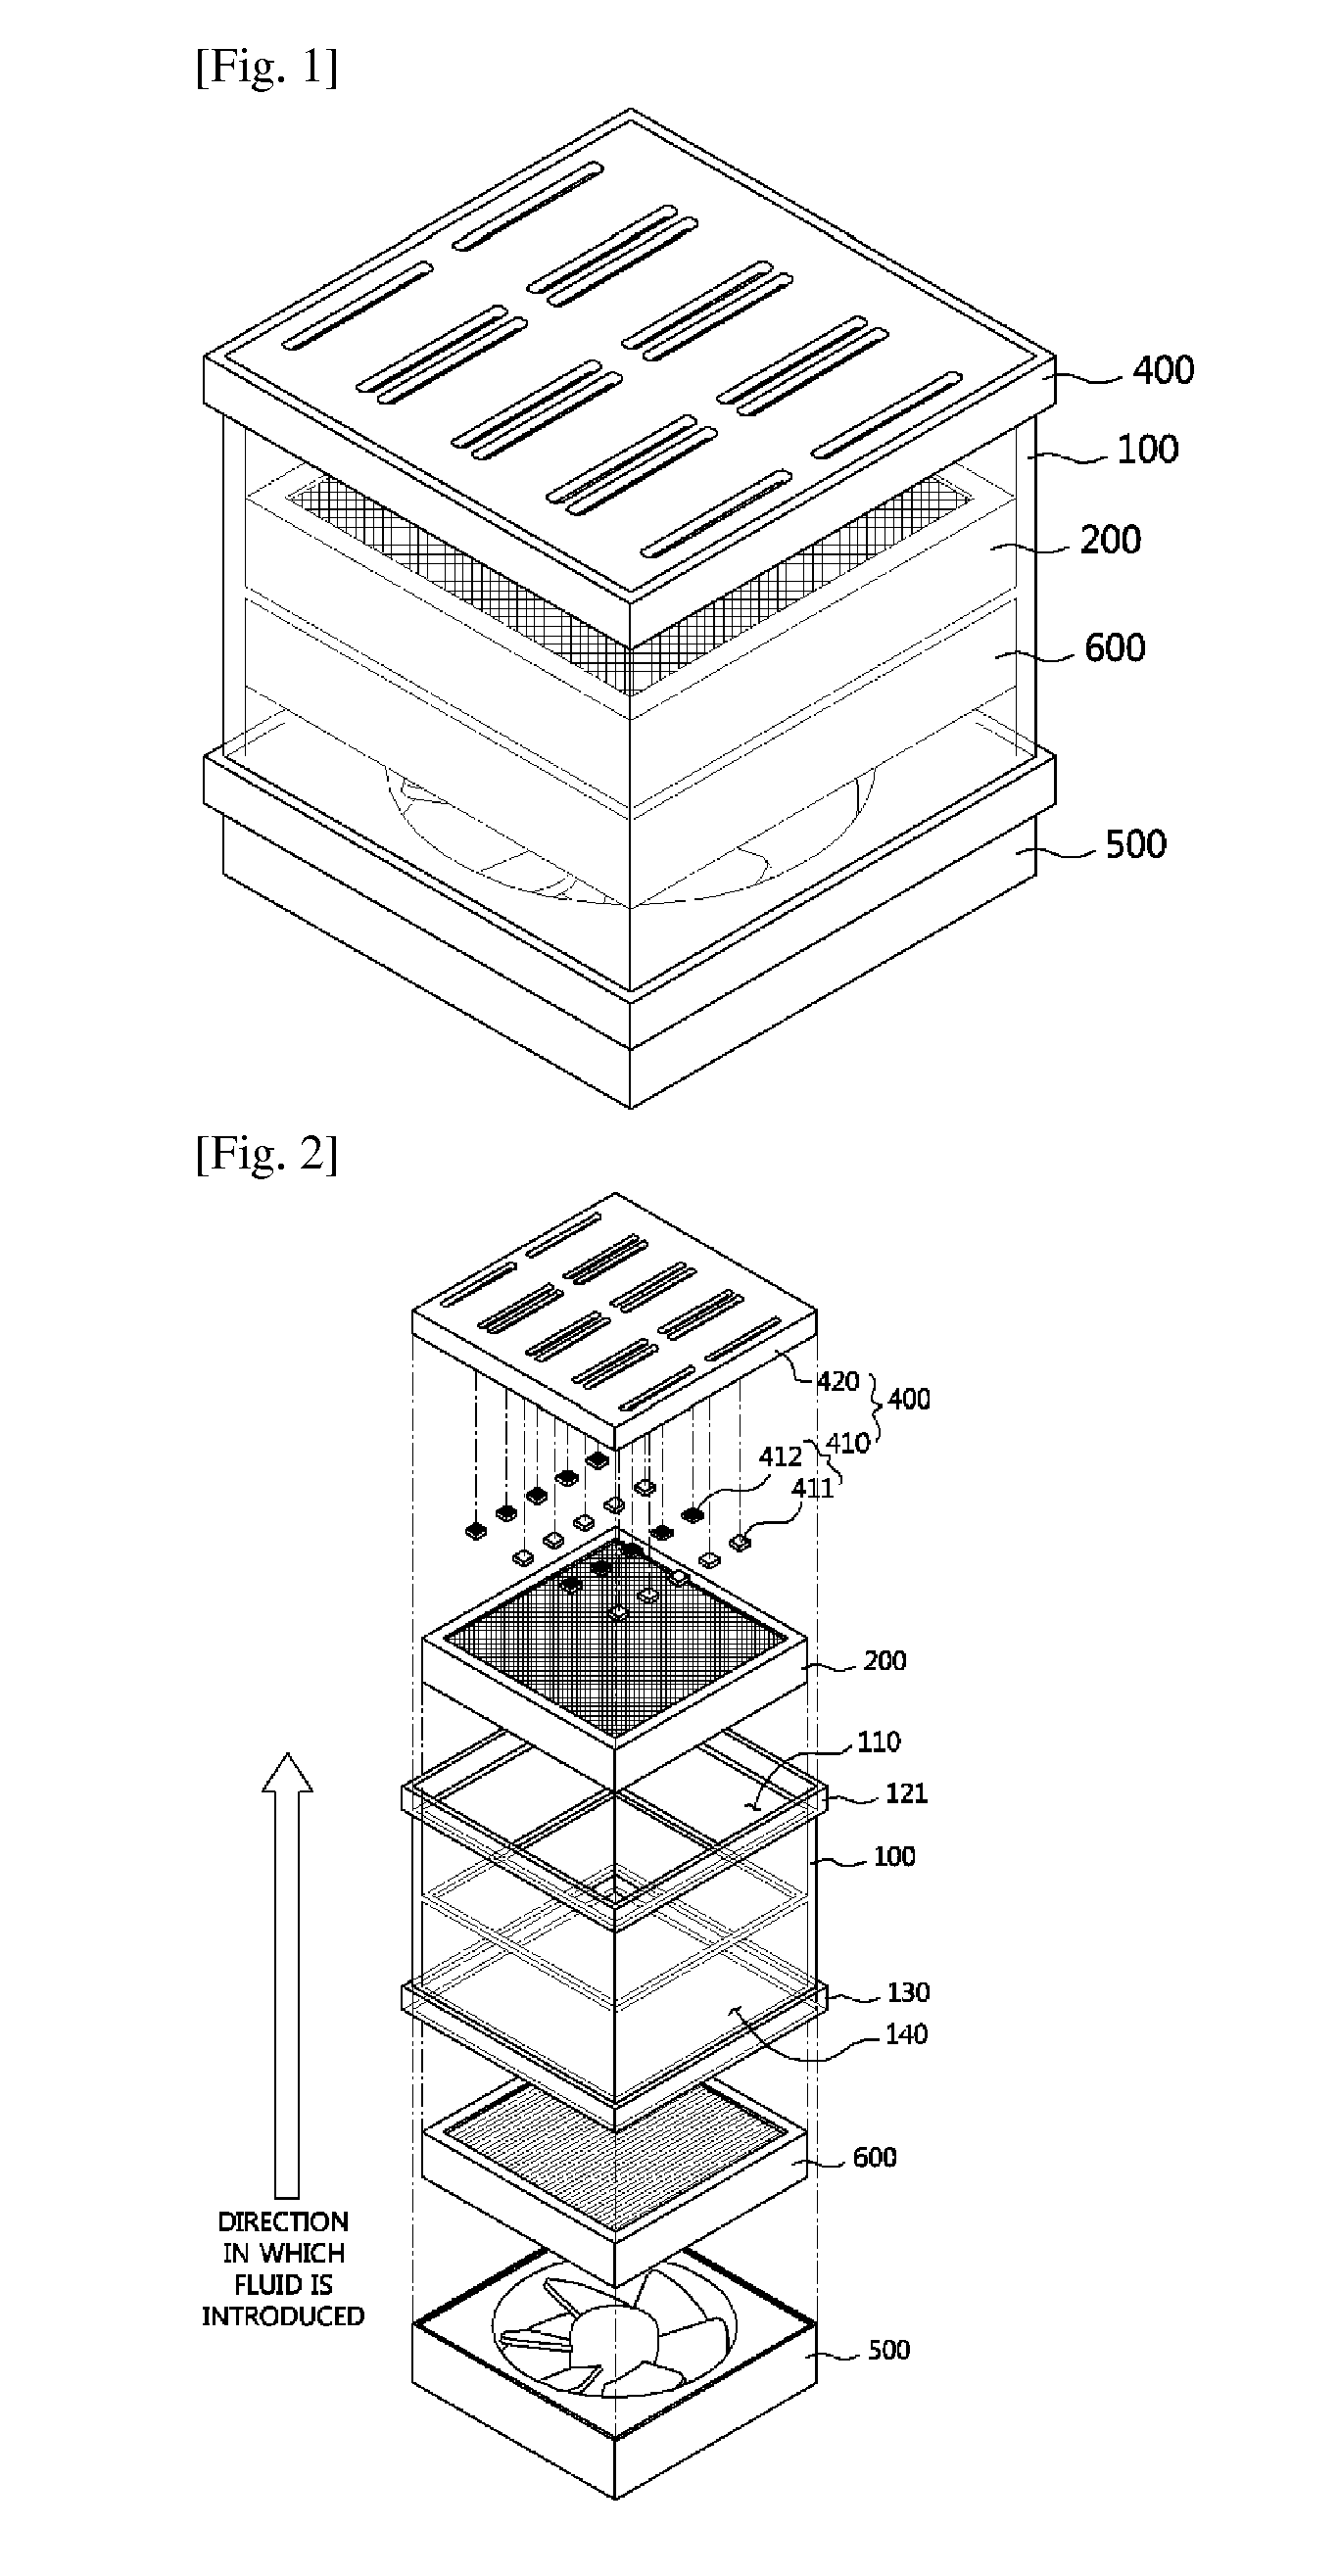 Apparatus for cleaning fluid